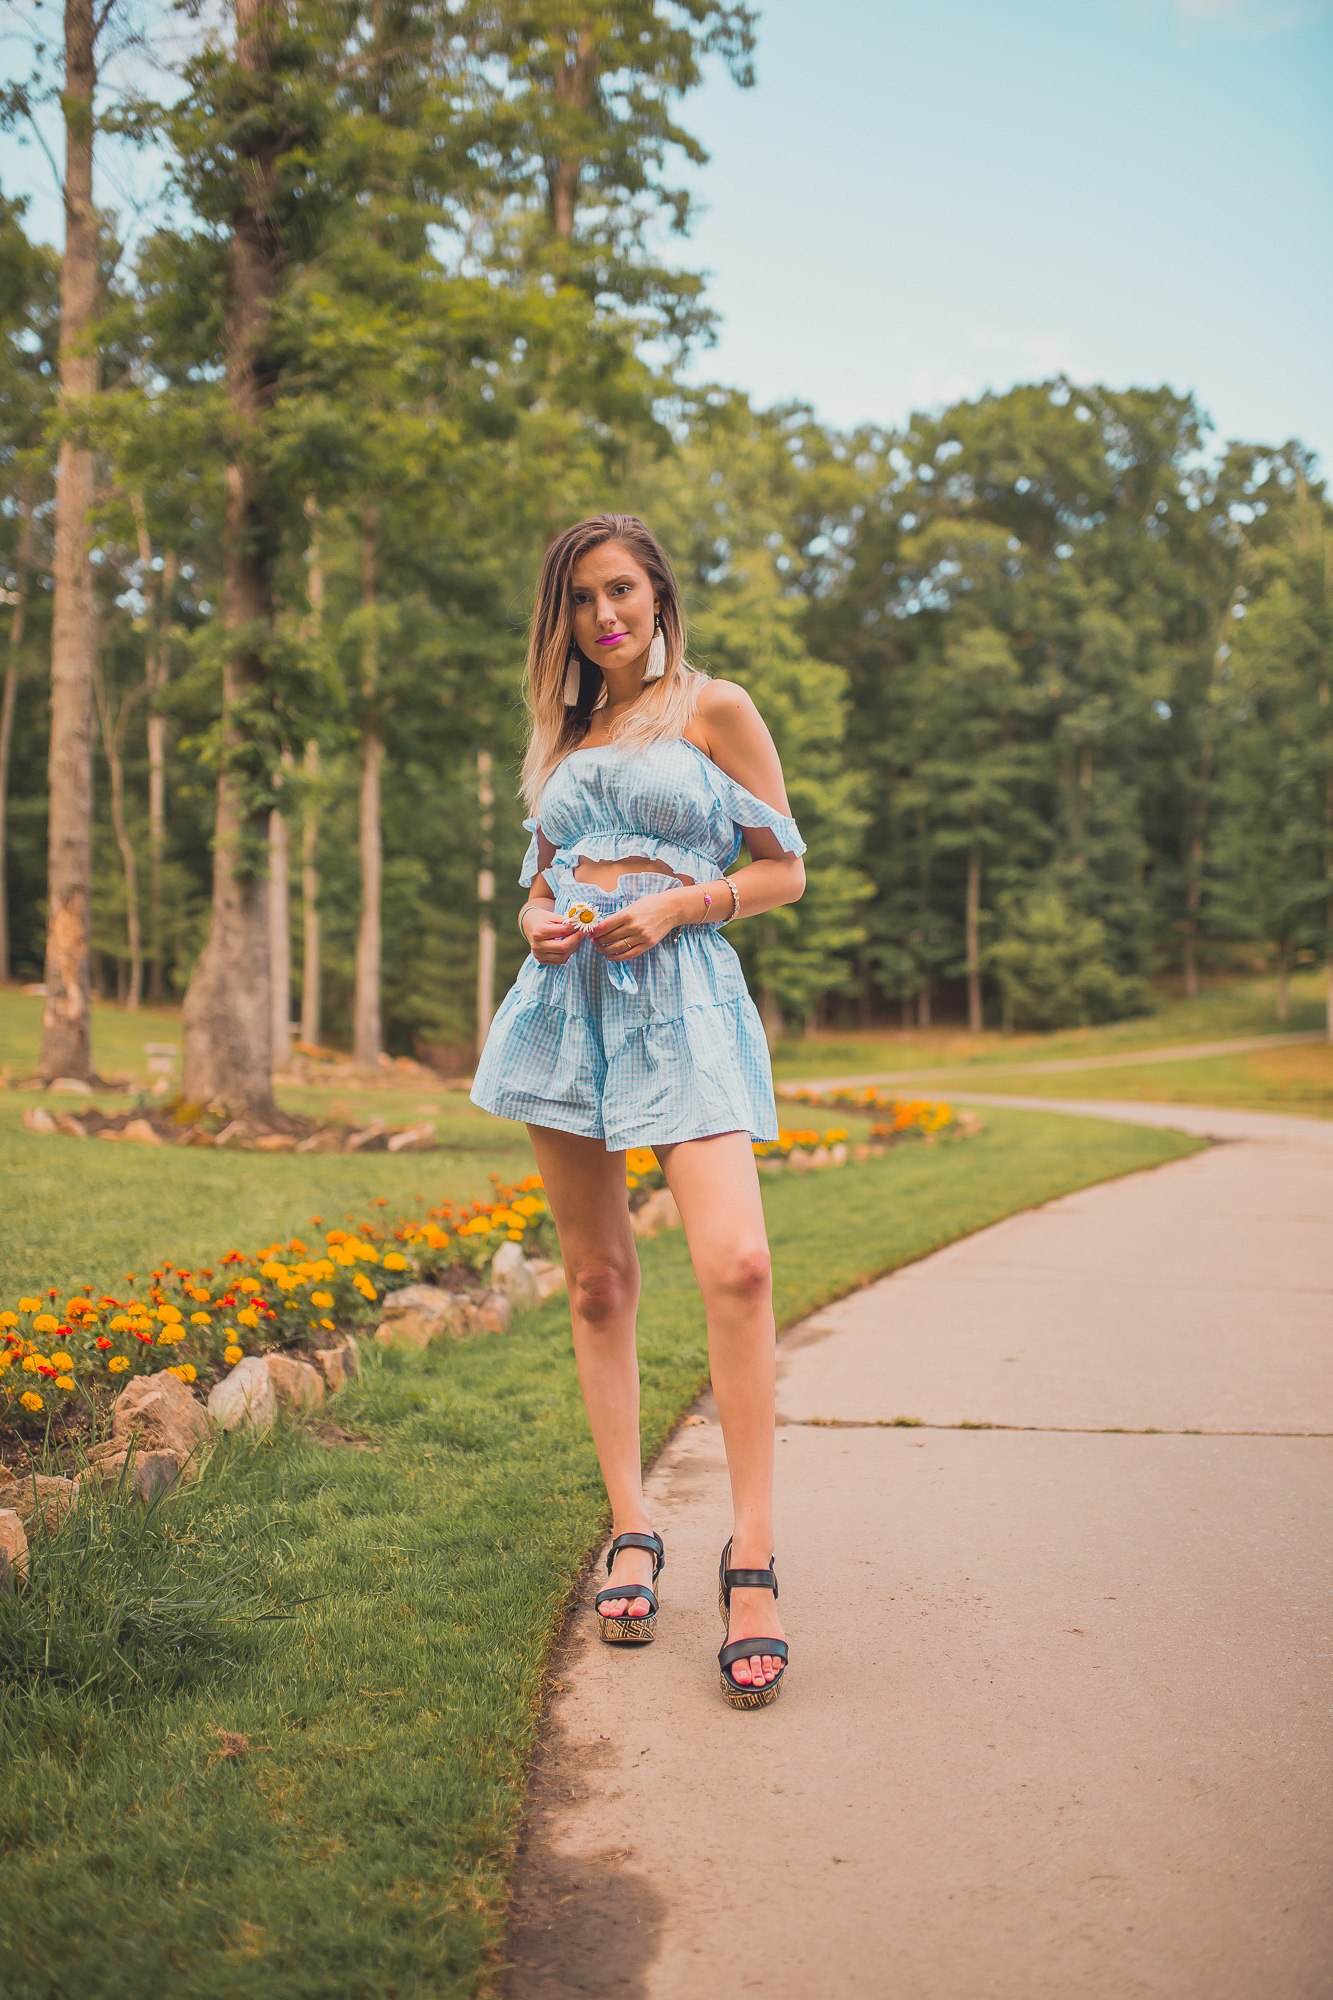 Gingham summer trend styled by North Carolina fashion and lifestyle blogger Jessica Linn from Linn Style. Two piece shorts and crop top gingham set from online fashion boutique Copper Bloom, platform sandals from Target, and tassel statement earrings from Copper Bloom.